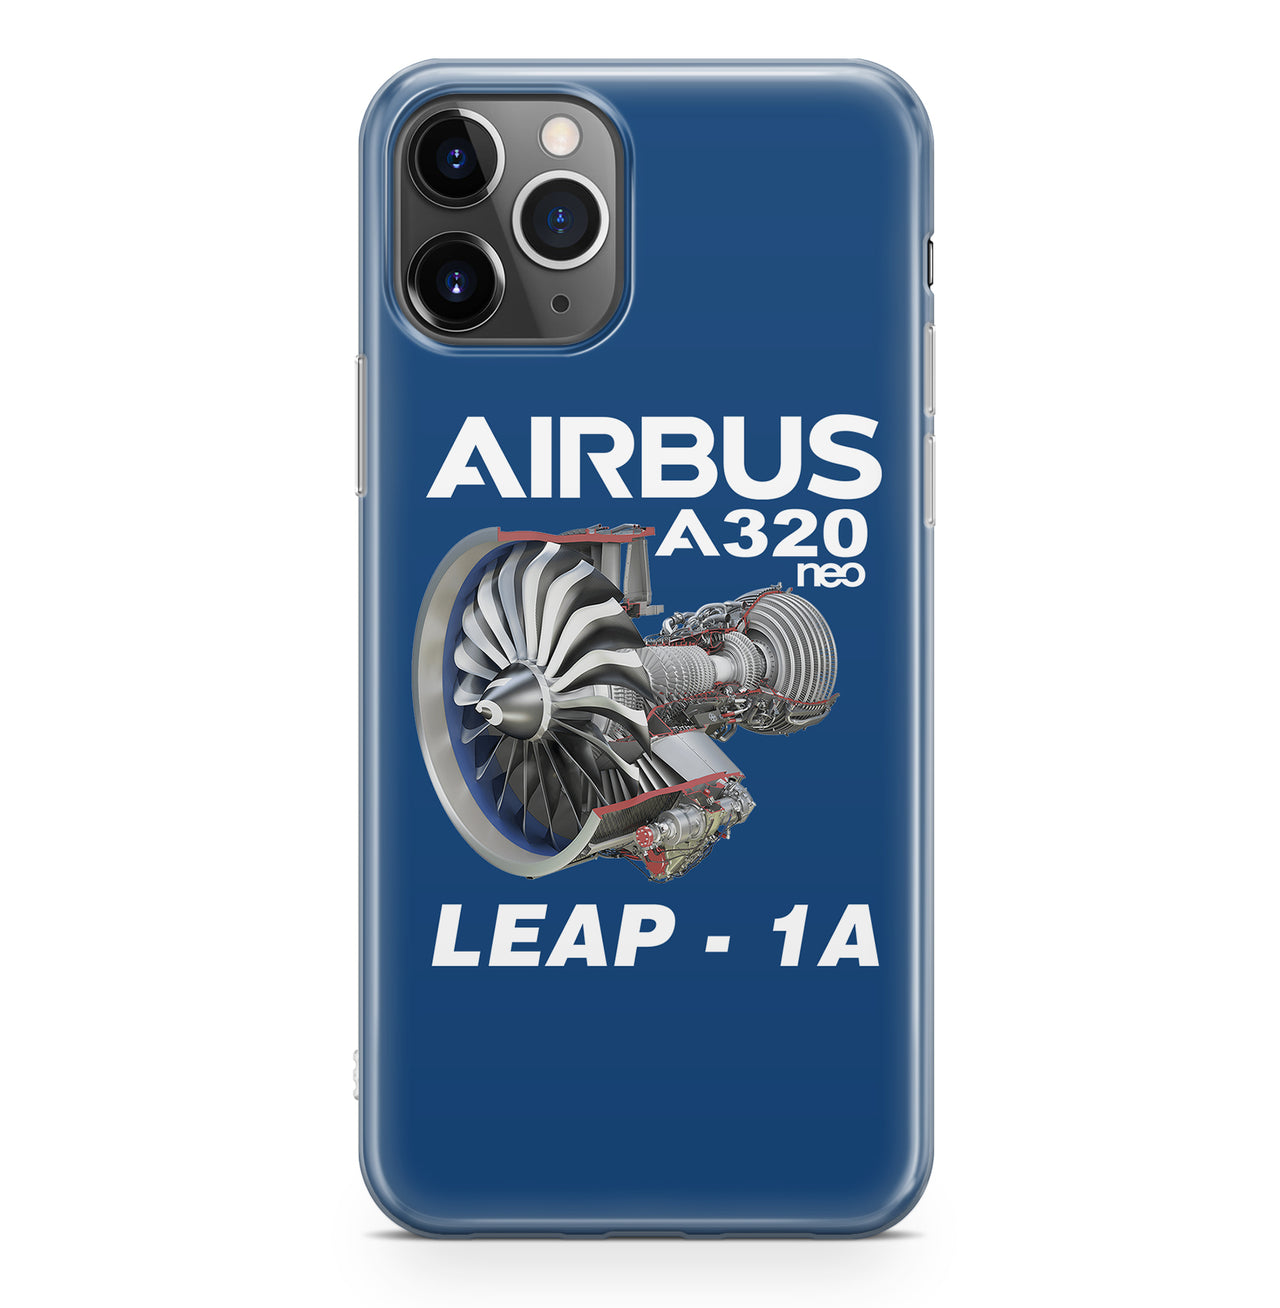 Airbus A320neo & Leap 1A Designed iPhone Cases